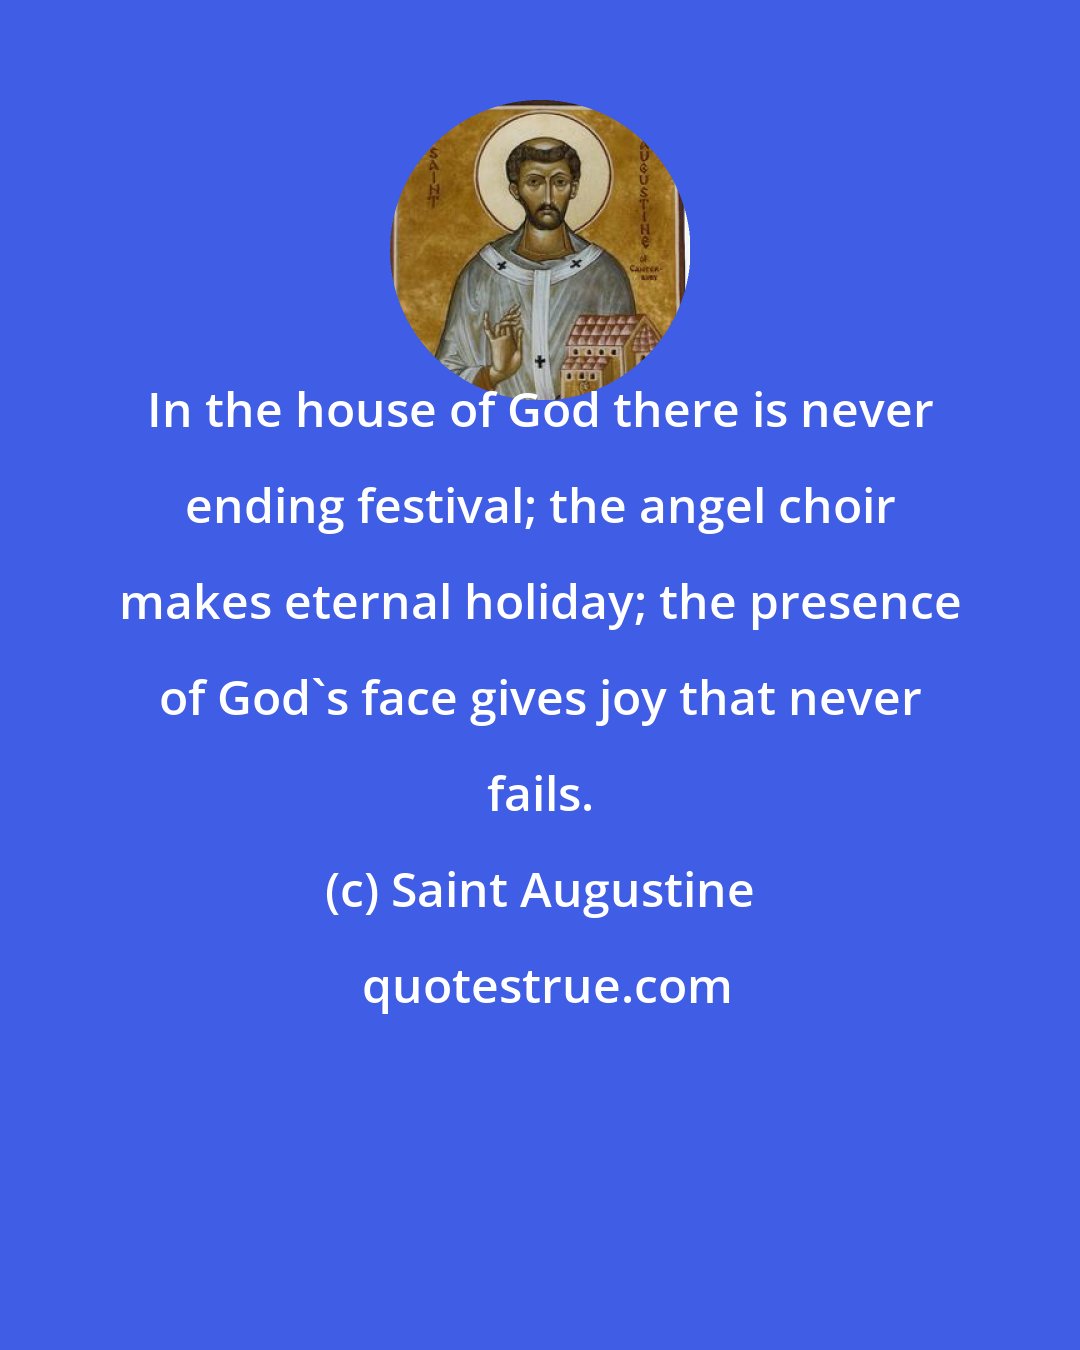 Saint Augustine: In the house of God there is never ending festival; the angel choir makes eternal holiday; the presence of God's face gives joy that never fails.